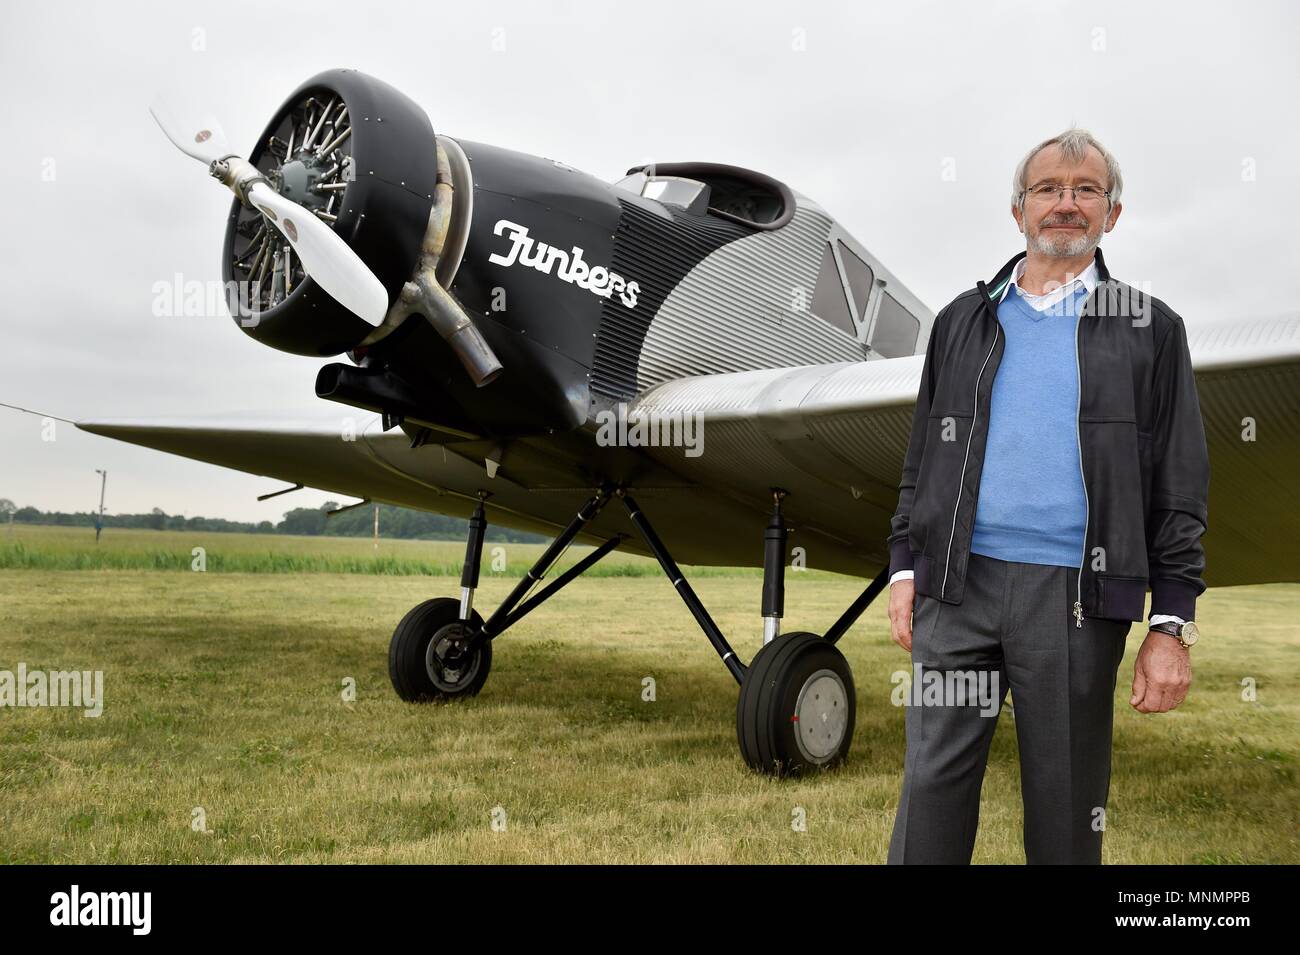 18 May 2018, Germany, Dessau-Rosslau: Bernd Junkers, grandson of Prof. Hugo Junkers, standing beside a replica of a Junkers F 13 which has landed at the airfield during the 13th Hugo Junkers Festival. The replica of one of Prof. Hugo Junkers' most famous creations is the only airworthy example of its kind. It was faithfully built over more than 10 years using original construction plans and laser measurements of museum planes. Photo: Frank May/dpa/ZB Stock Photo